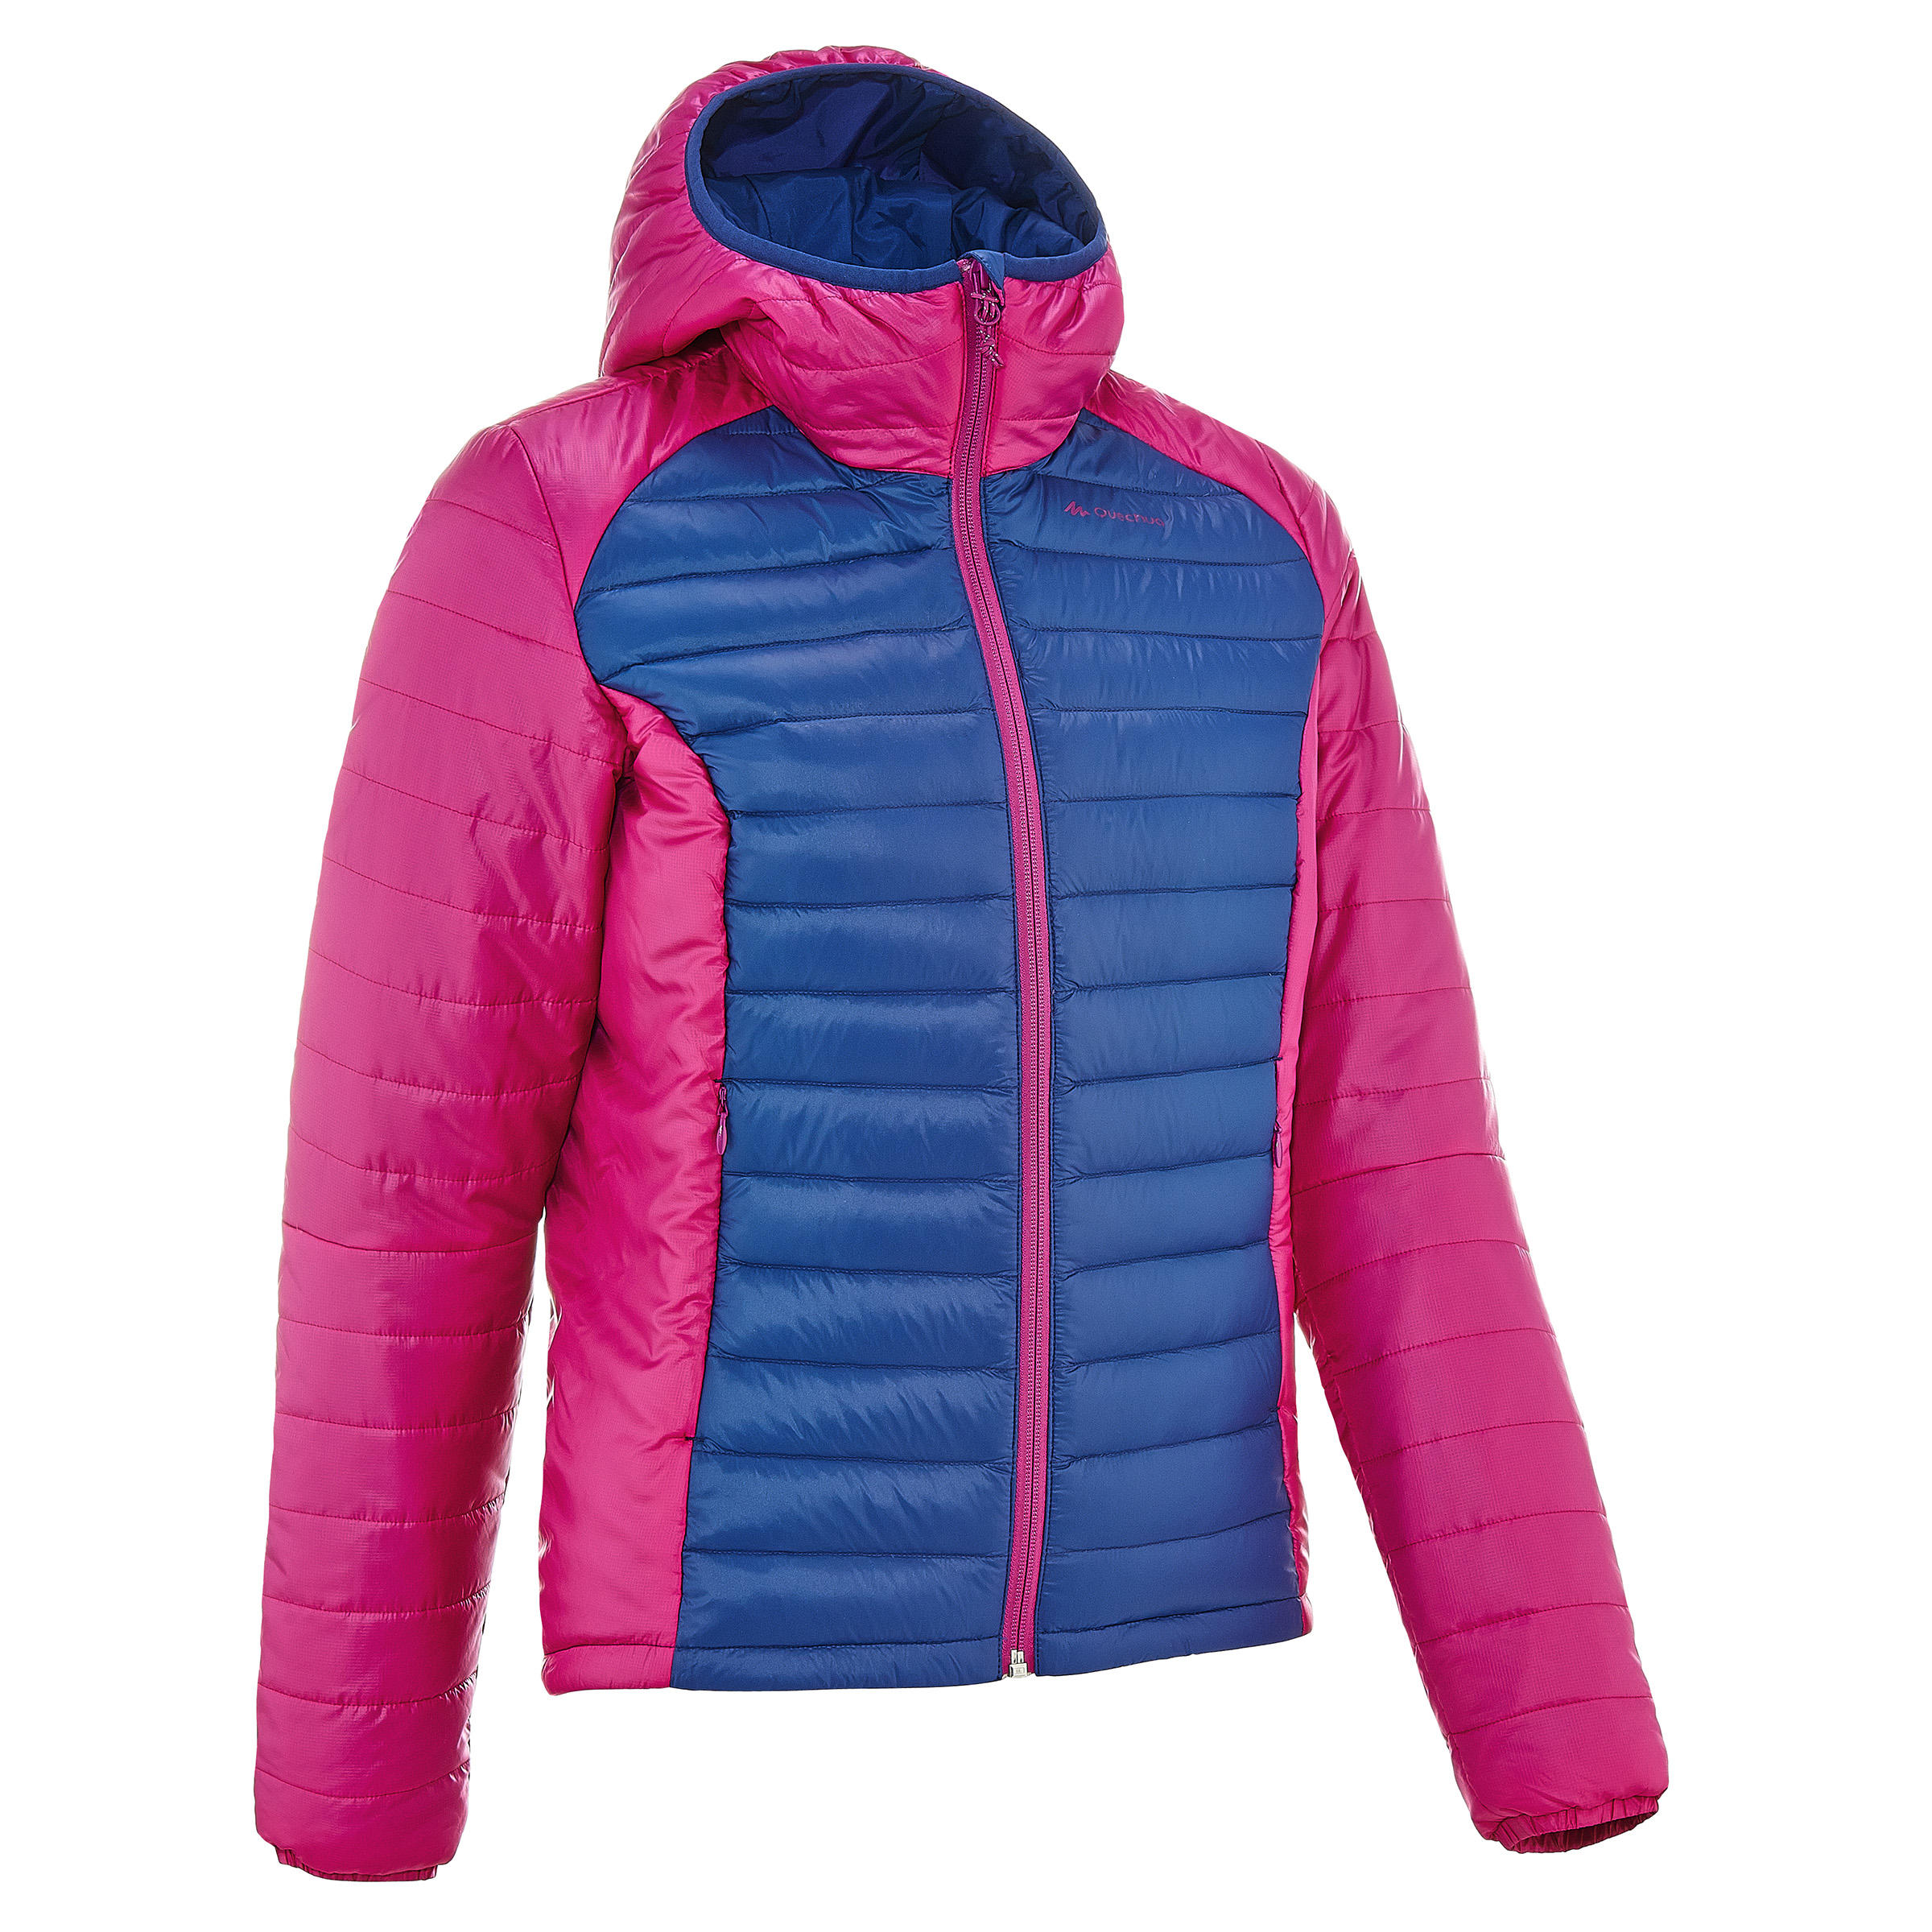 FORCLAZ X-Light Ladies' Quilted Hiking Jacket - dual colour